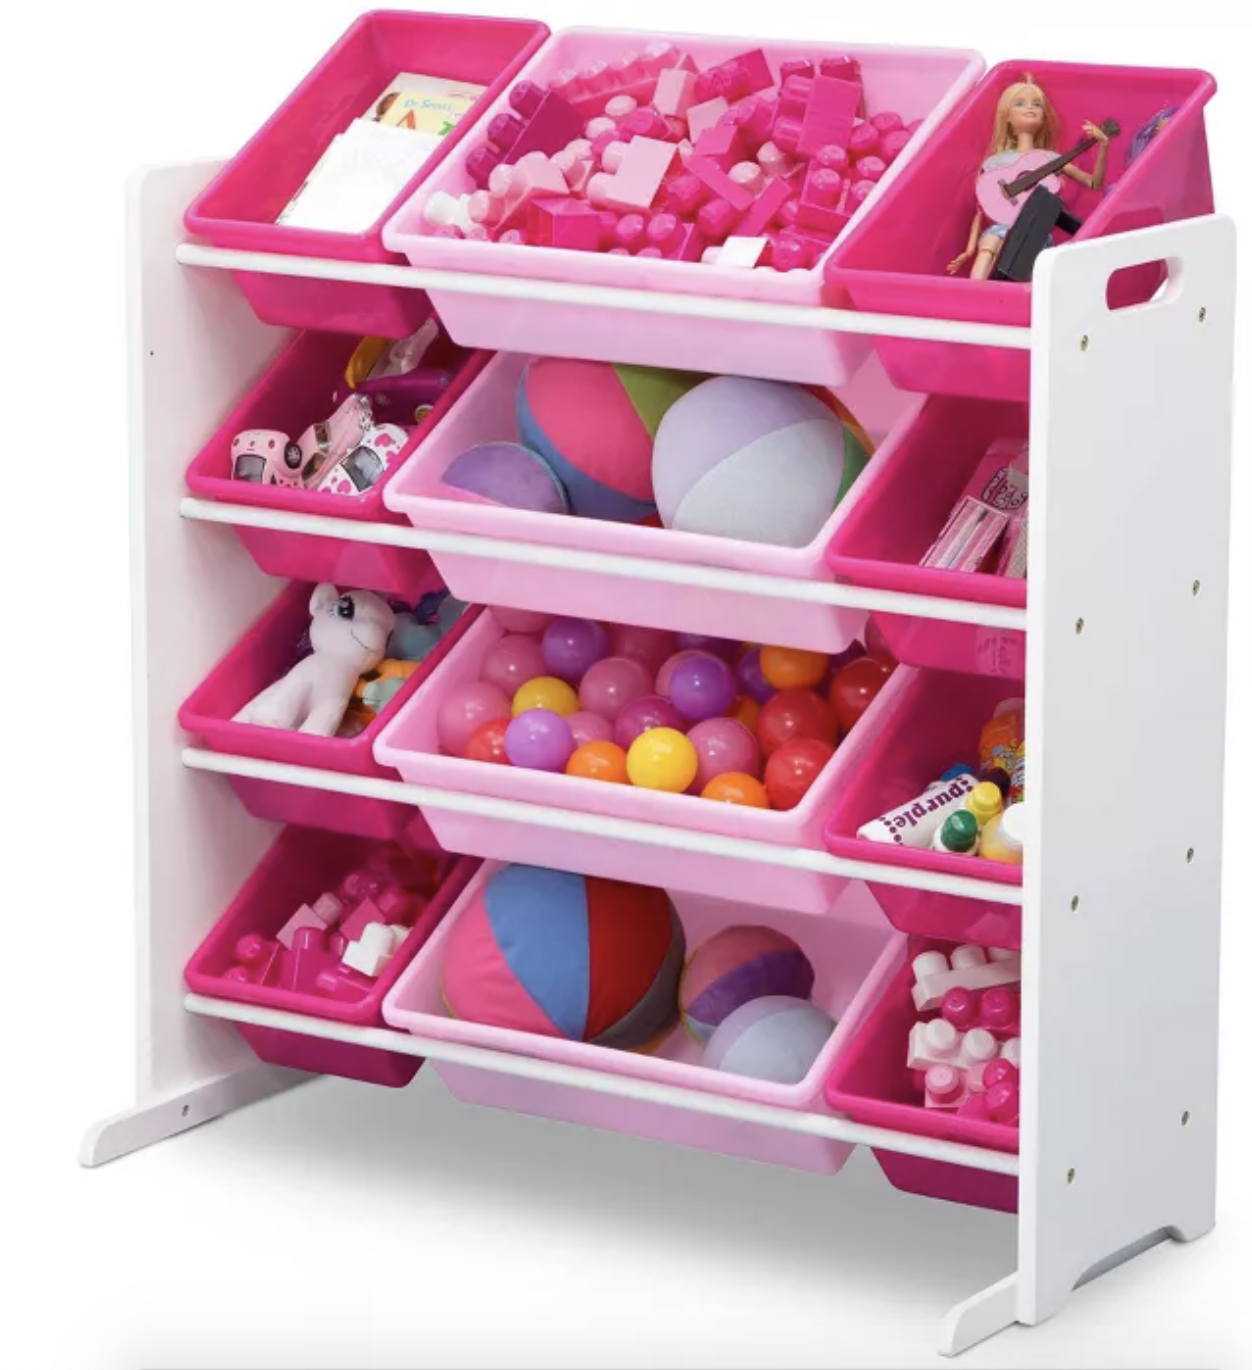 Stock photo of a pink storage unit for children&#x27;s toys